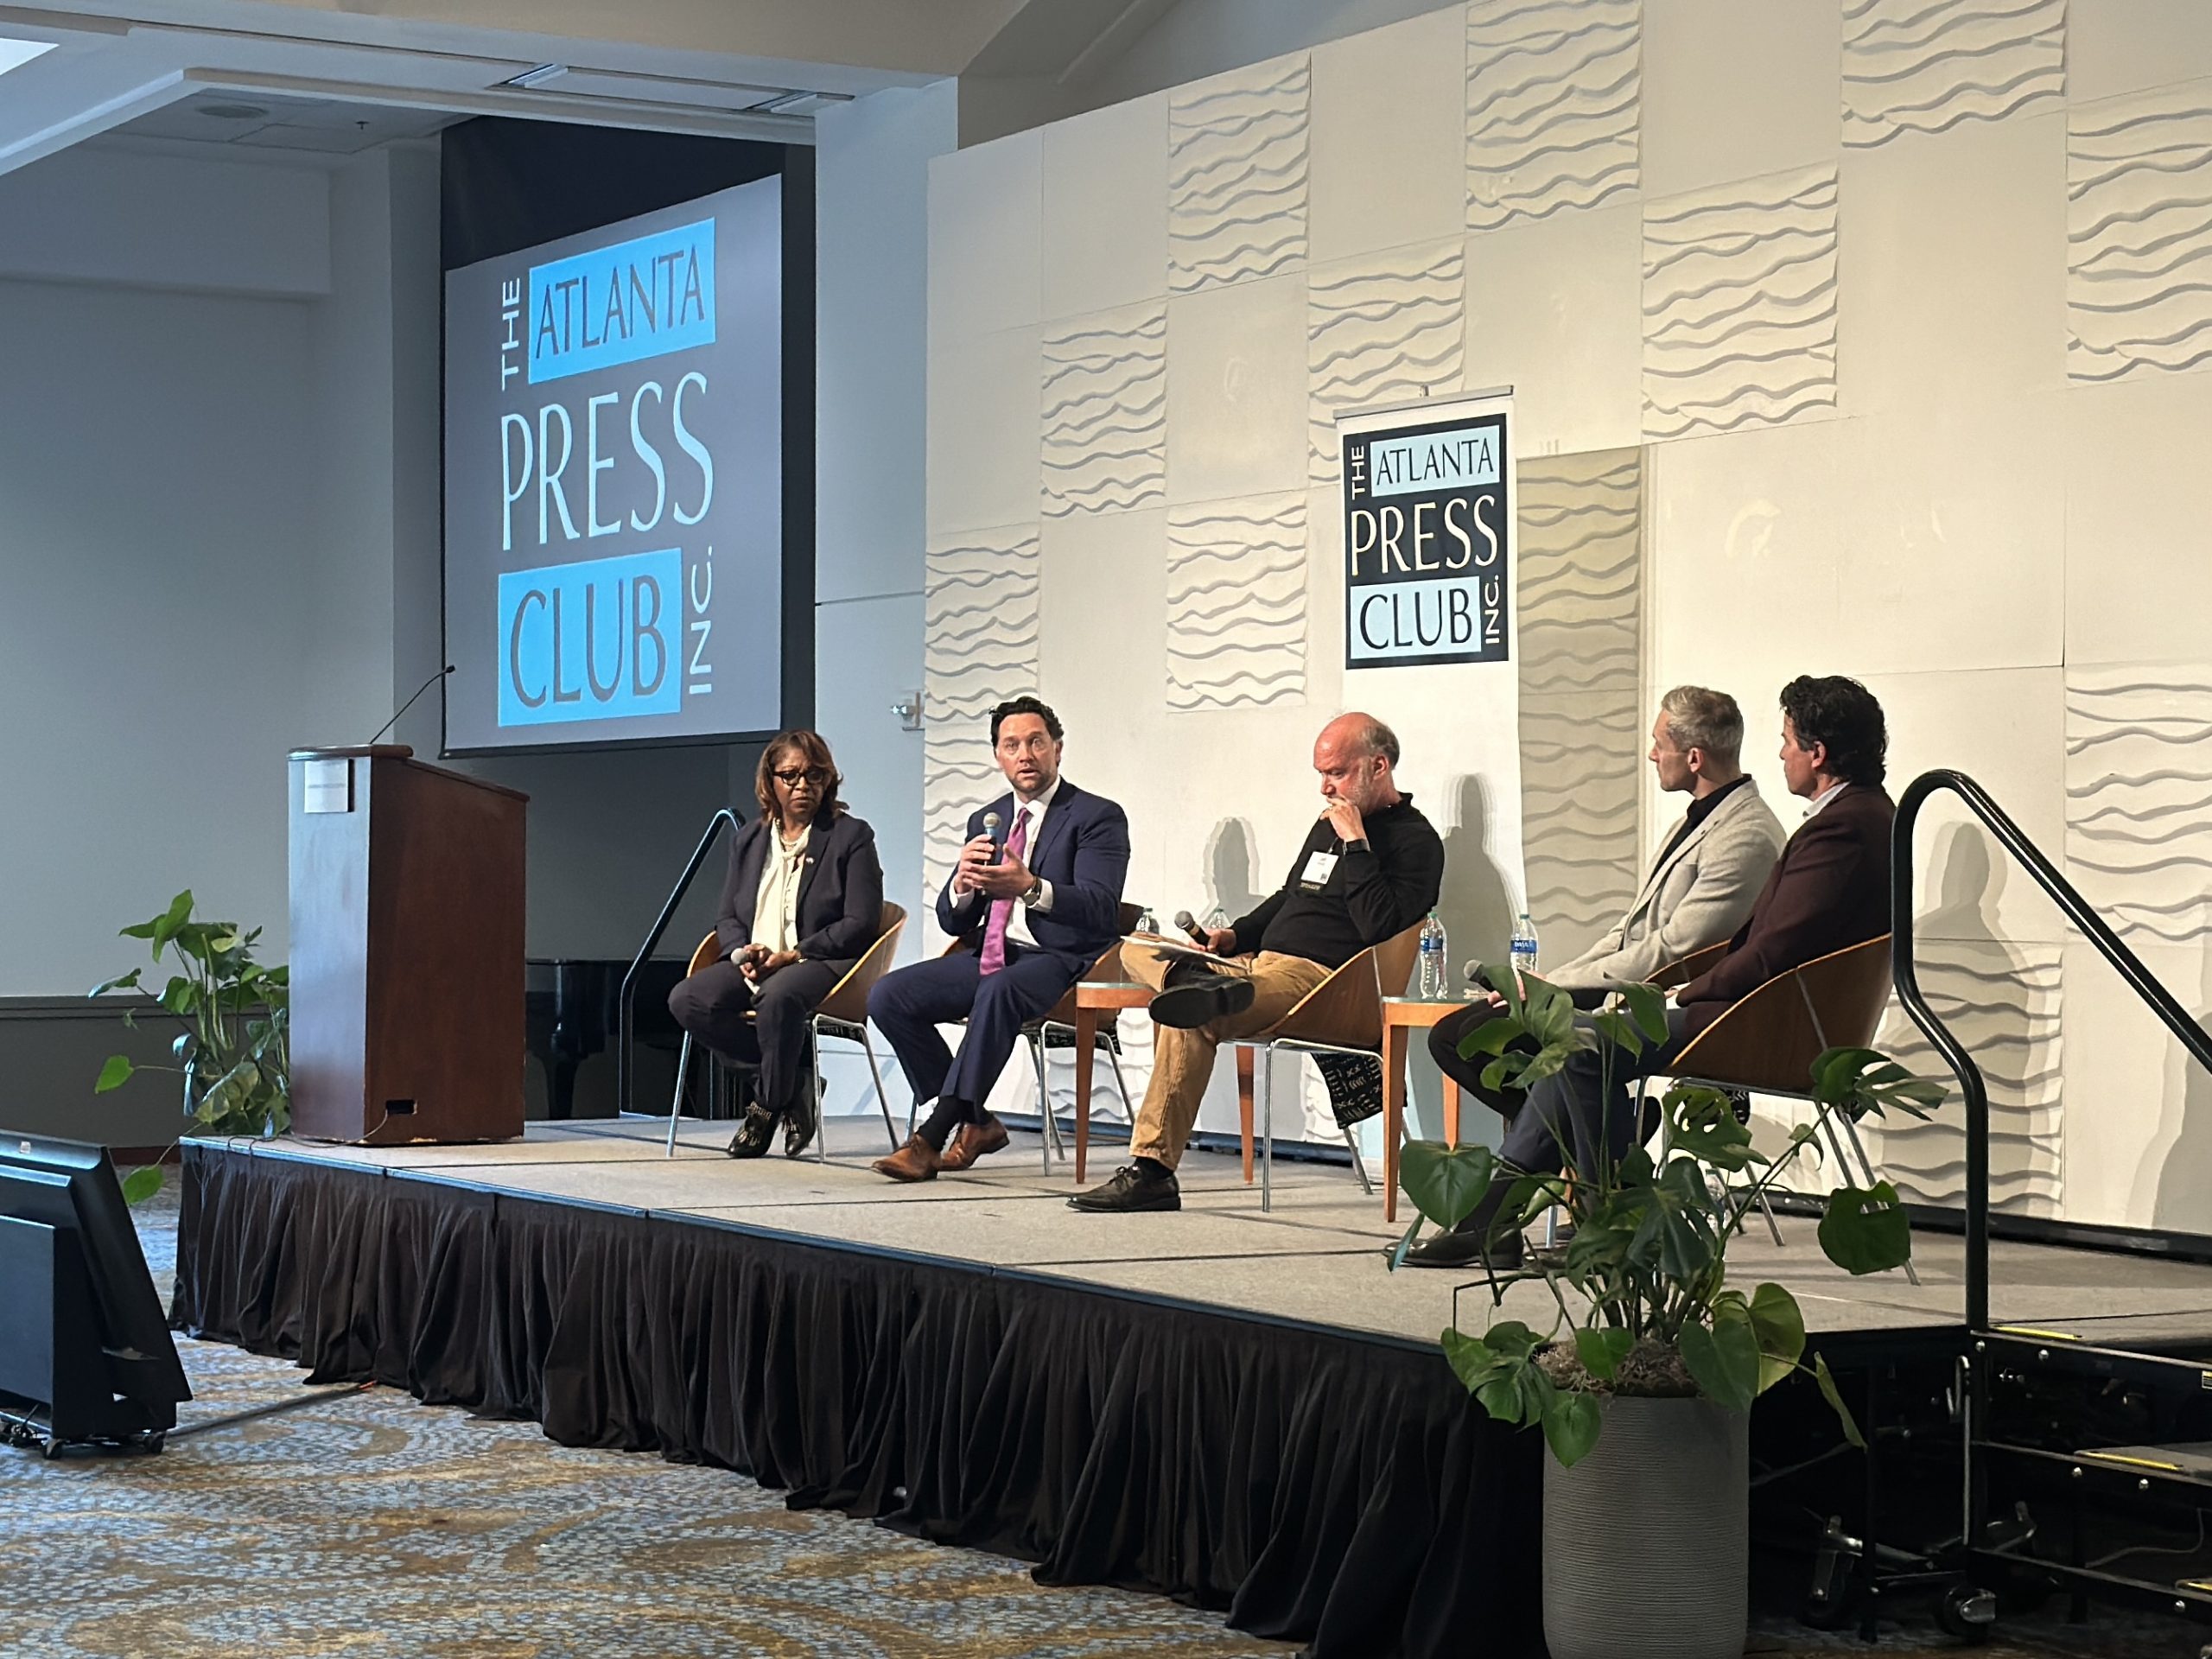 City and sports leaders talk impacts of the athletic industry on Atlanta - SaportaReport